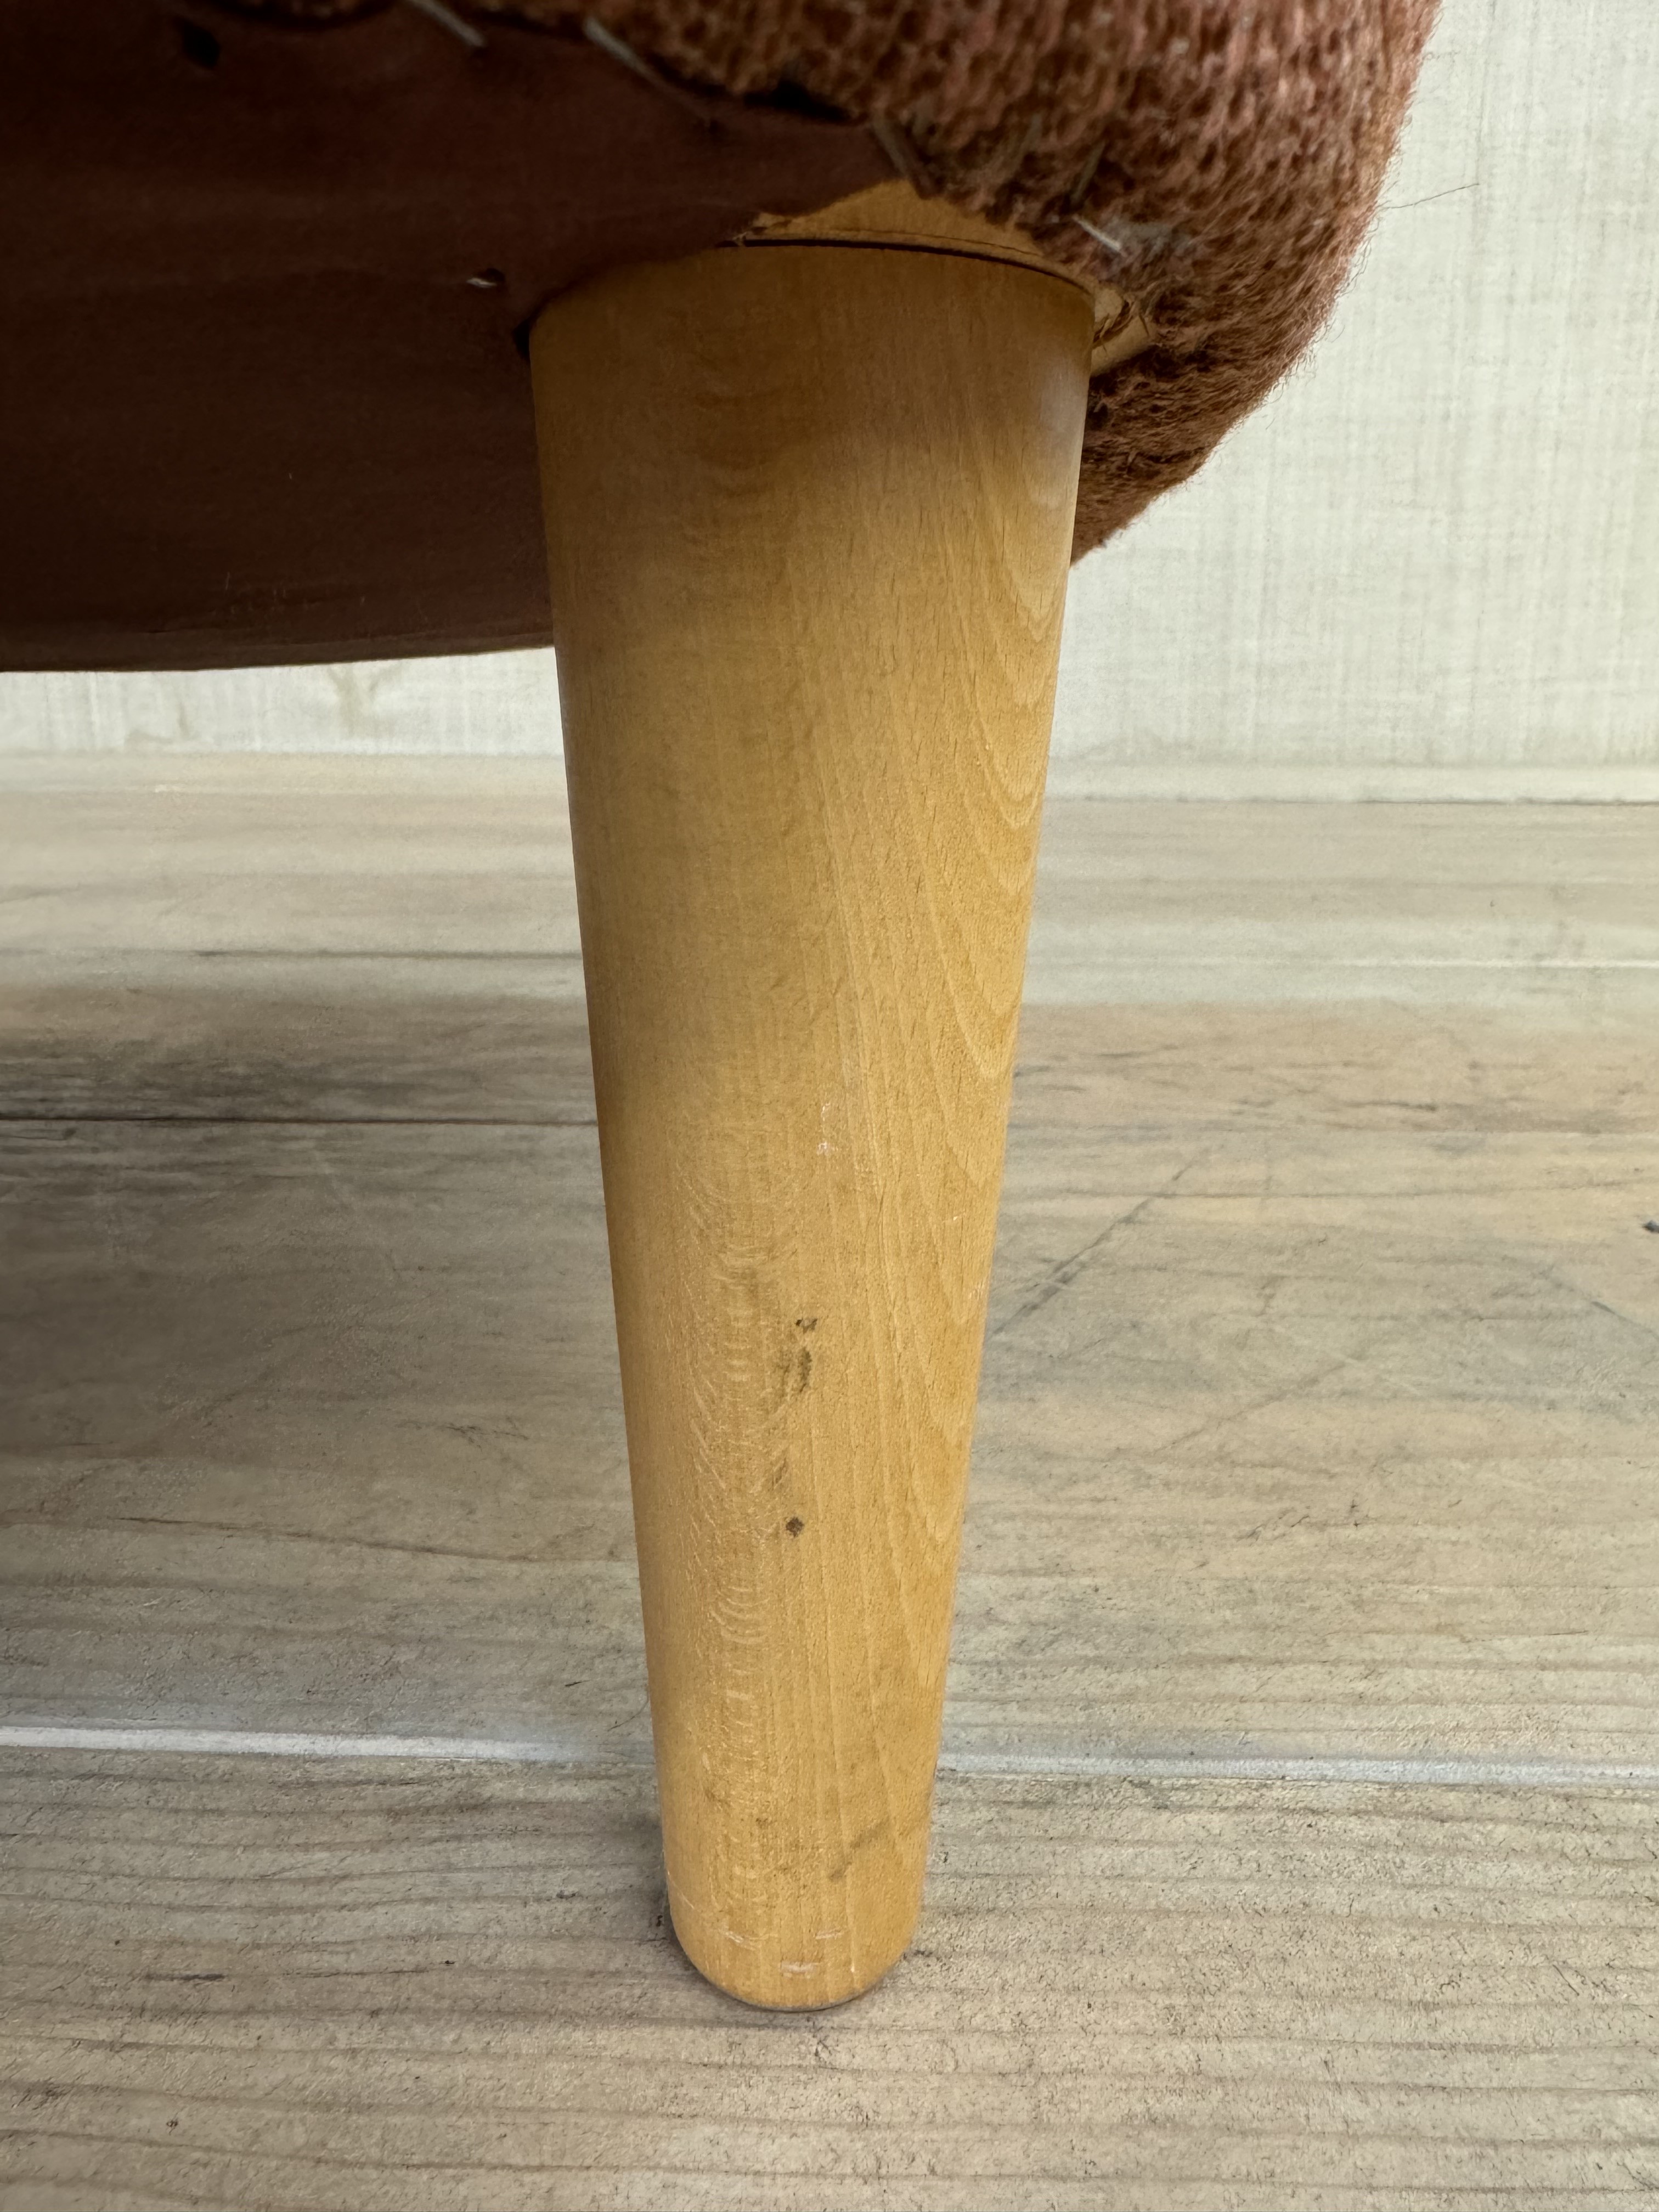 a close up of a wooden floor with a cat on it